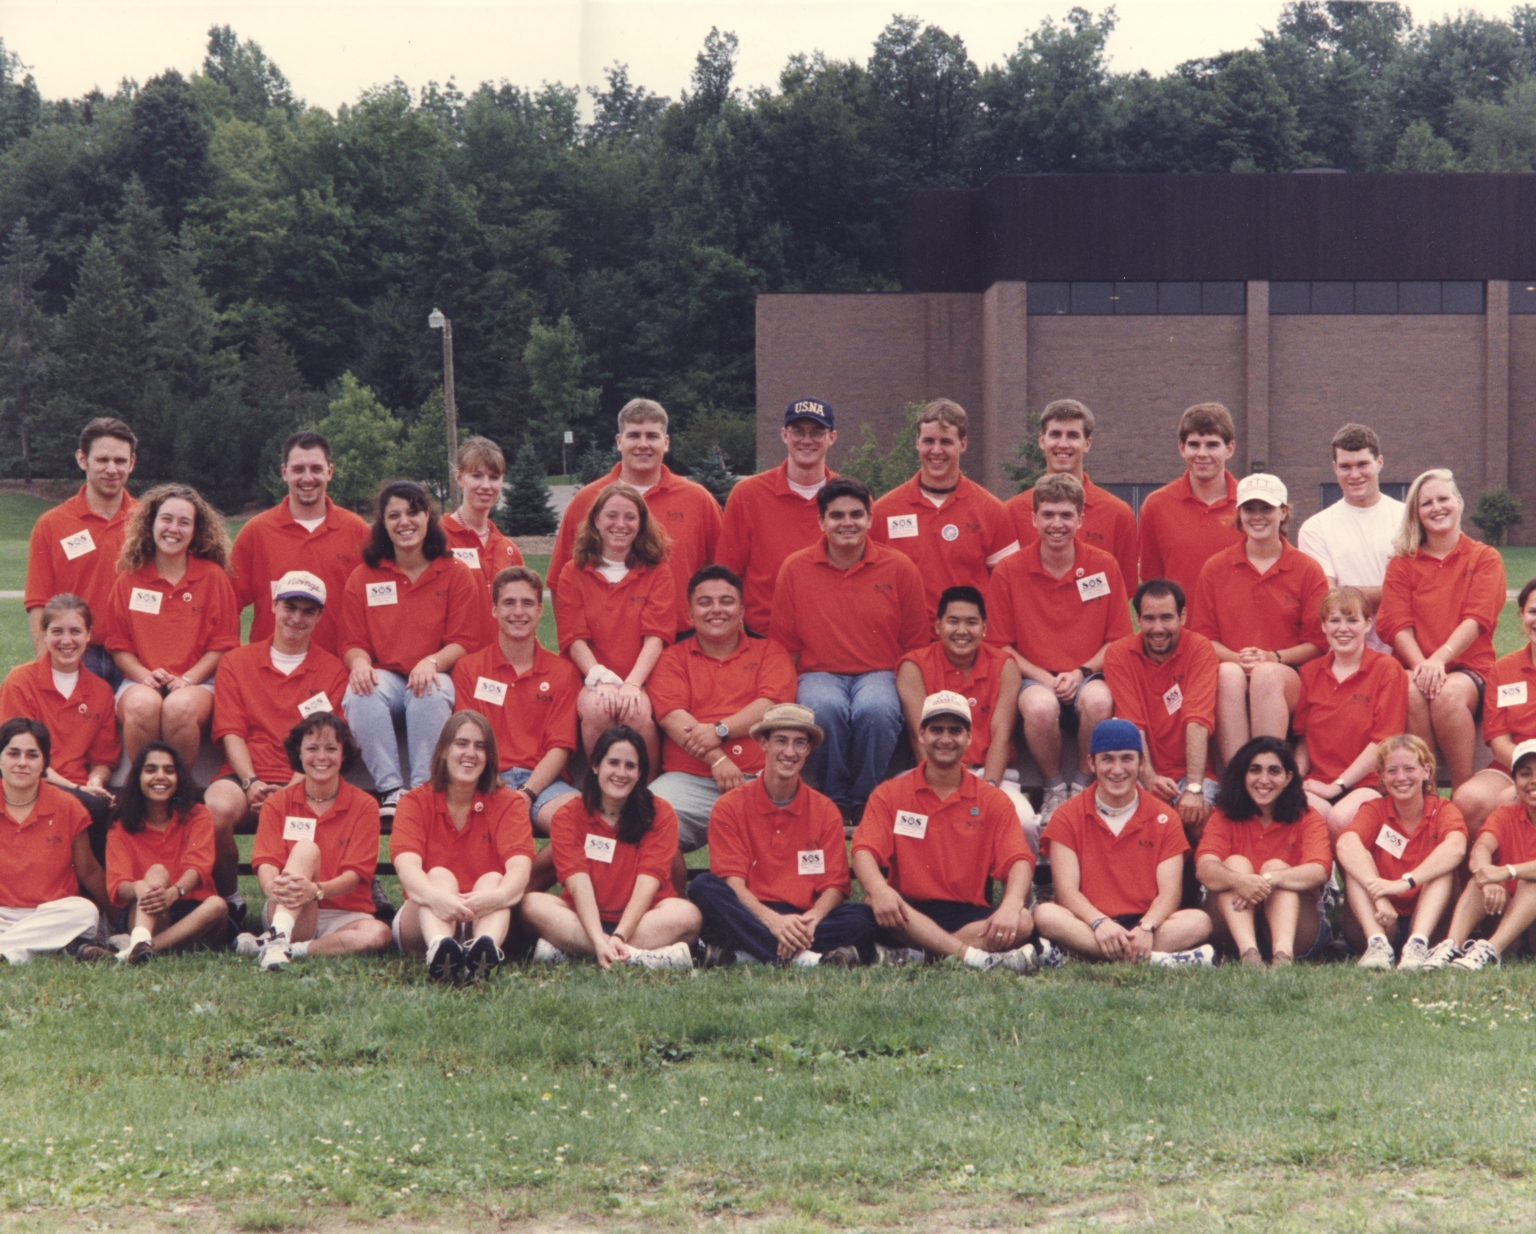 1997 Student Orientation Services Leaders